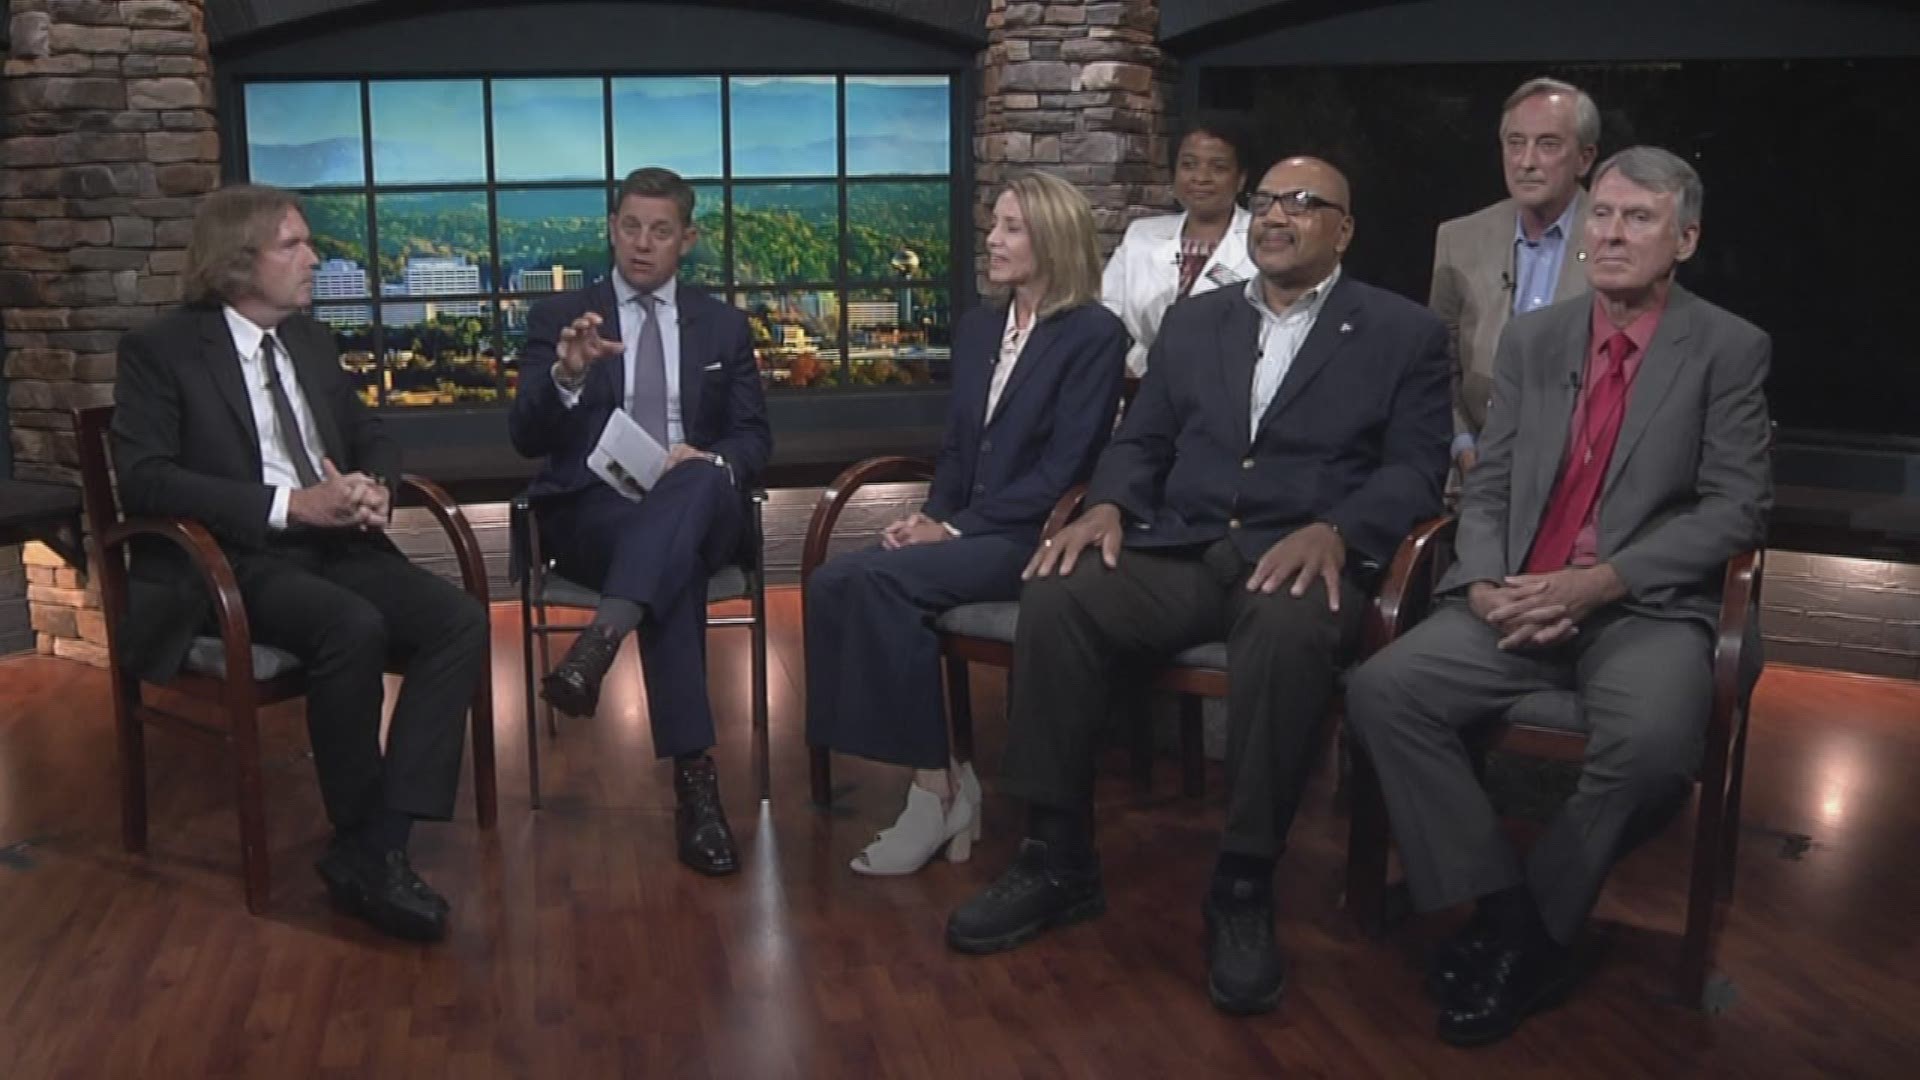 Knoxville City Council At-large C candidates Amy Midis, Hubert Smith, David Williams, Amelia Parker and Bob Thomas talk about their positions in the race.